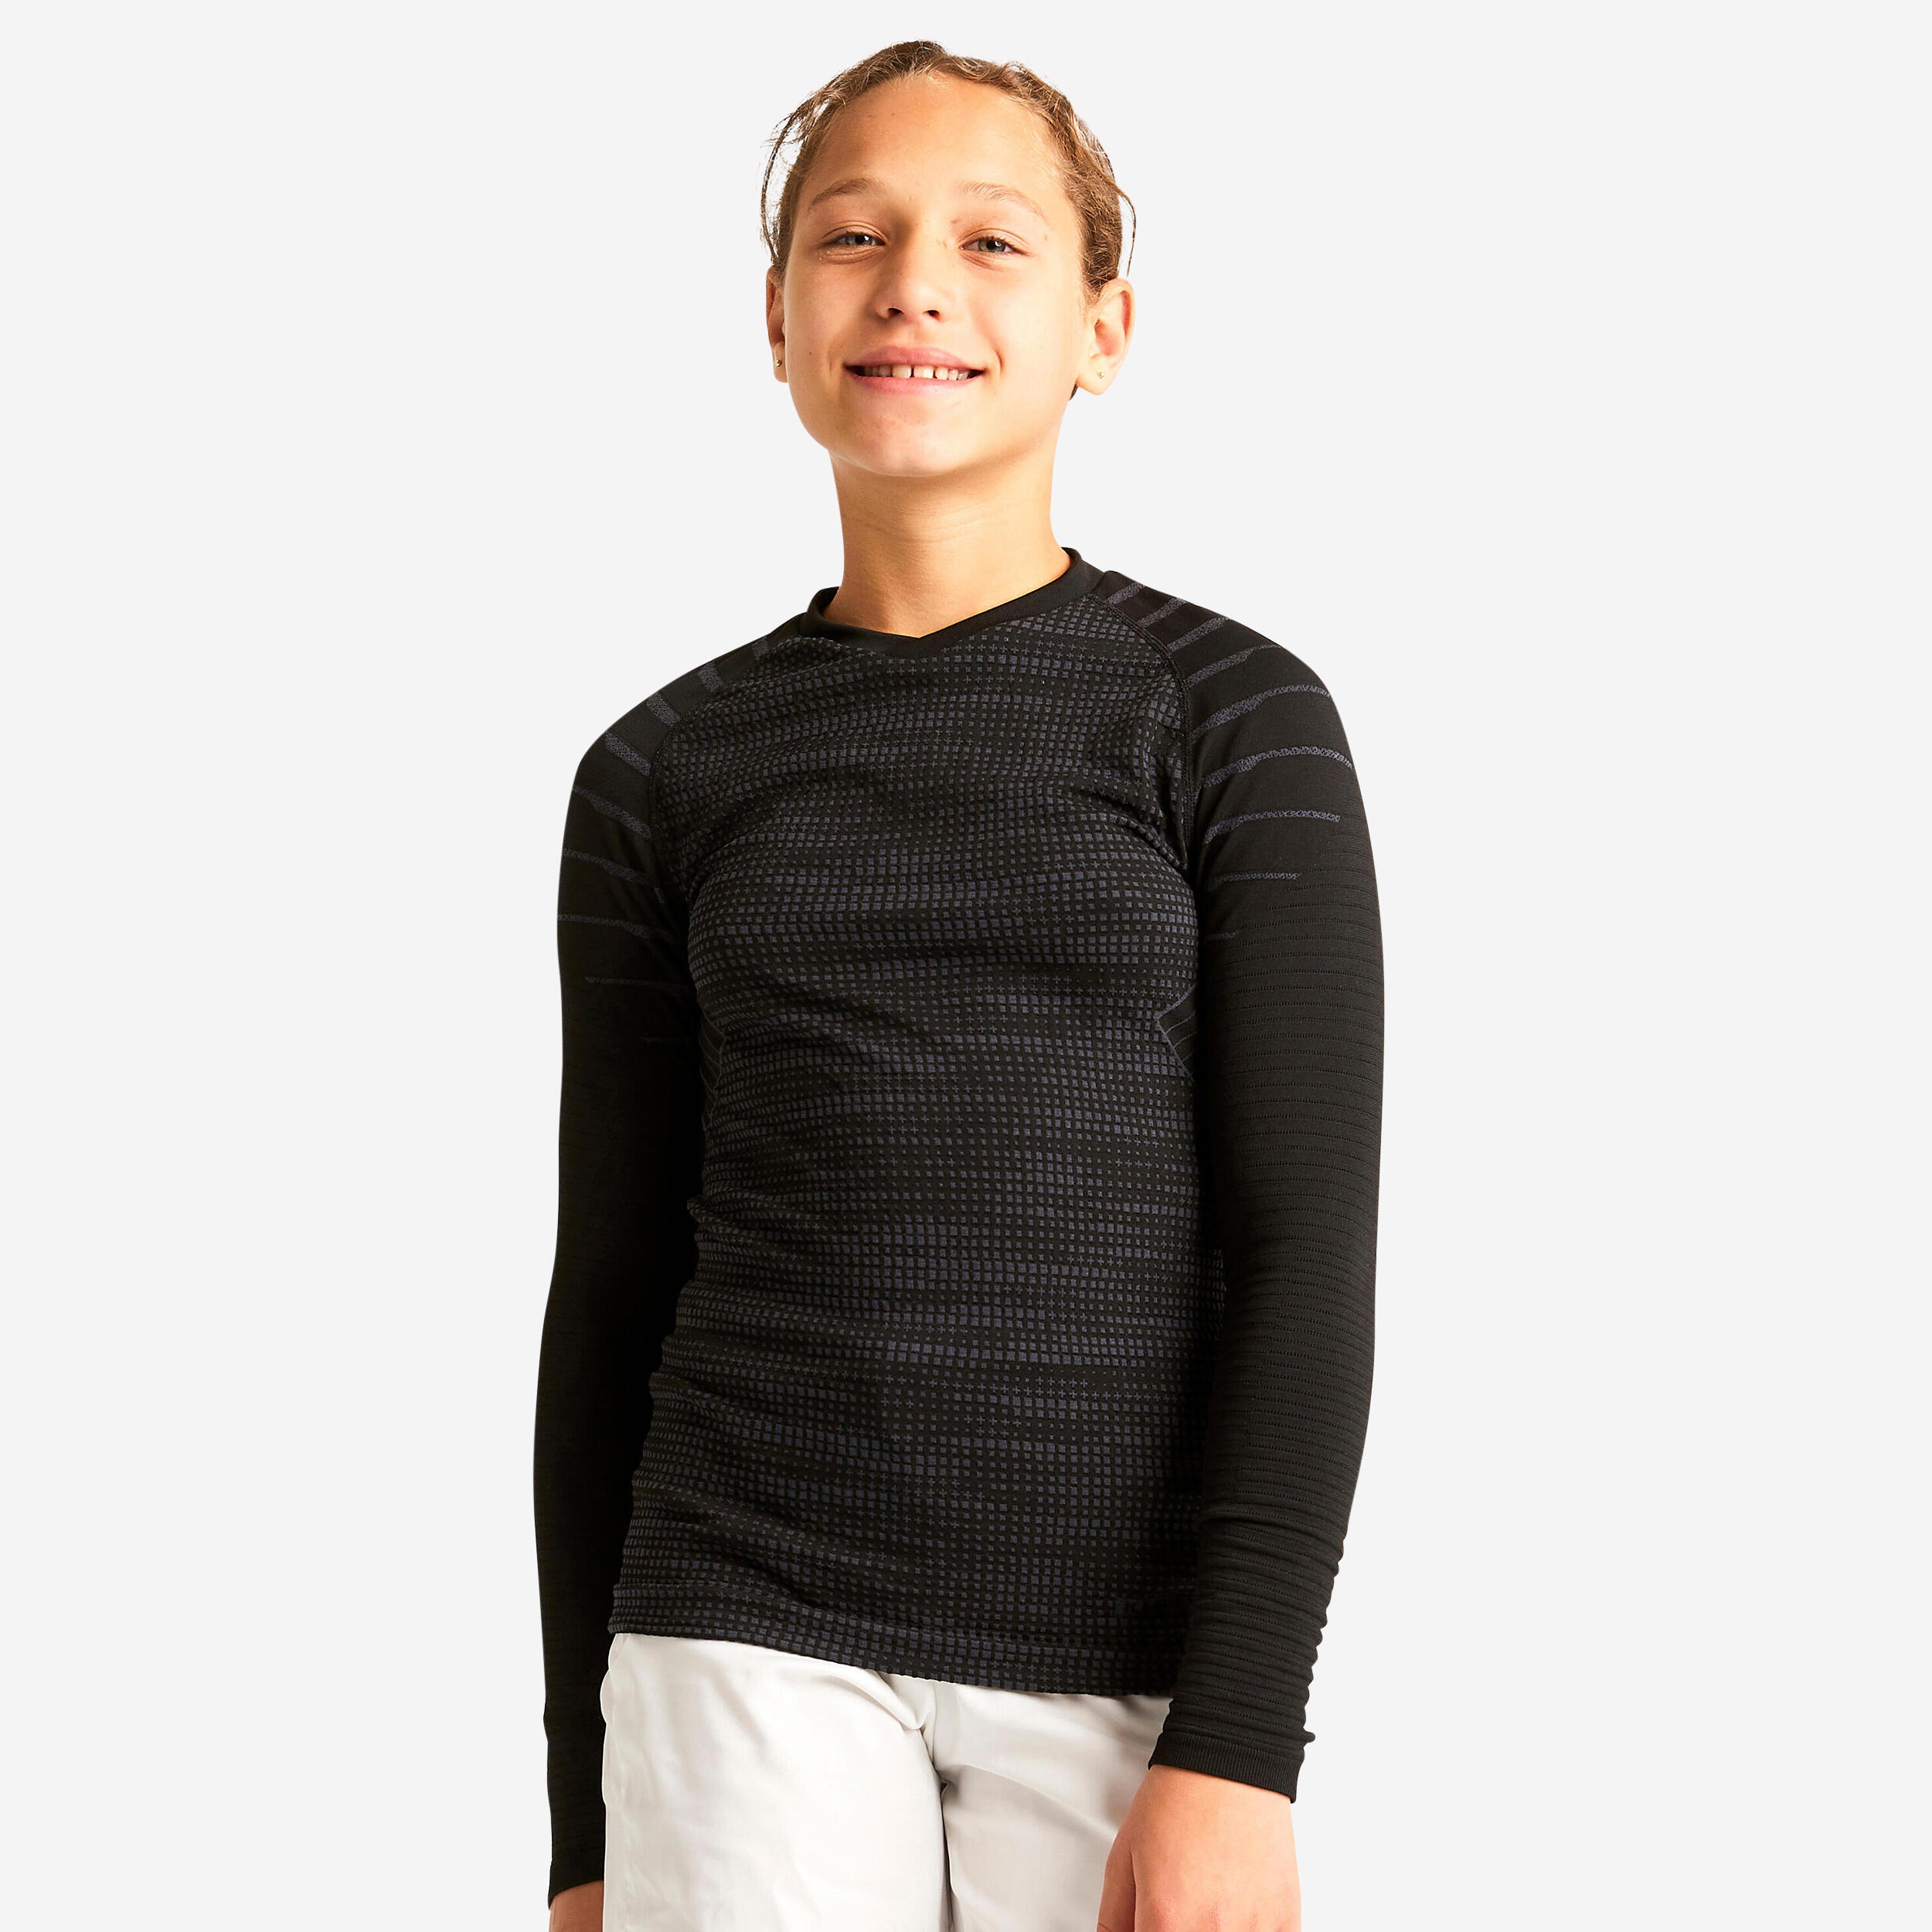 Kids' Long-Sleeved Thermal Base Layer Top